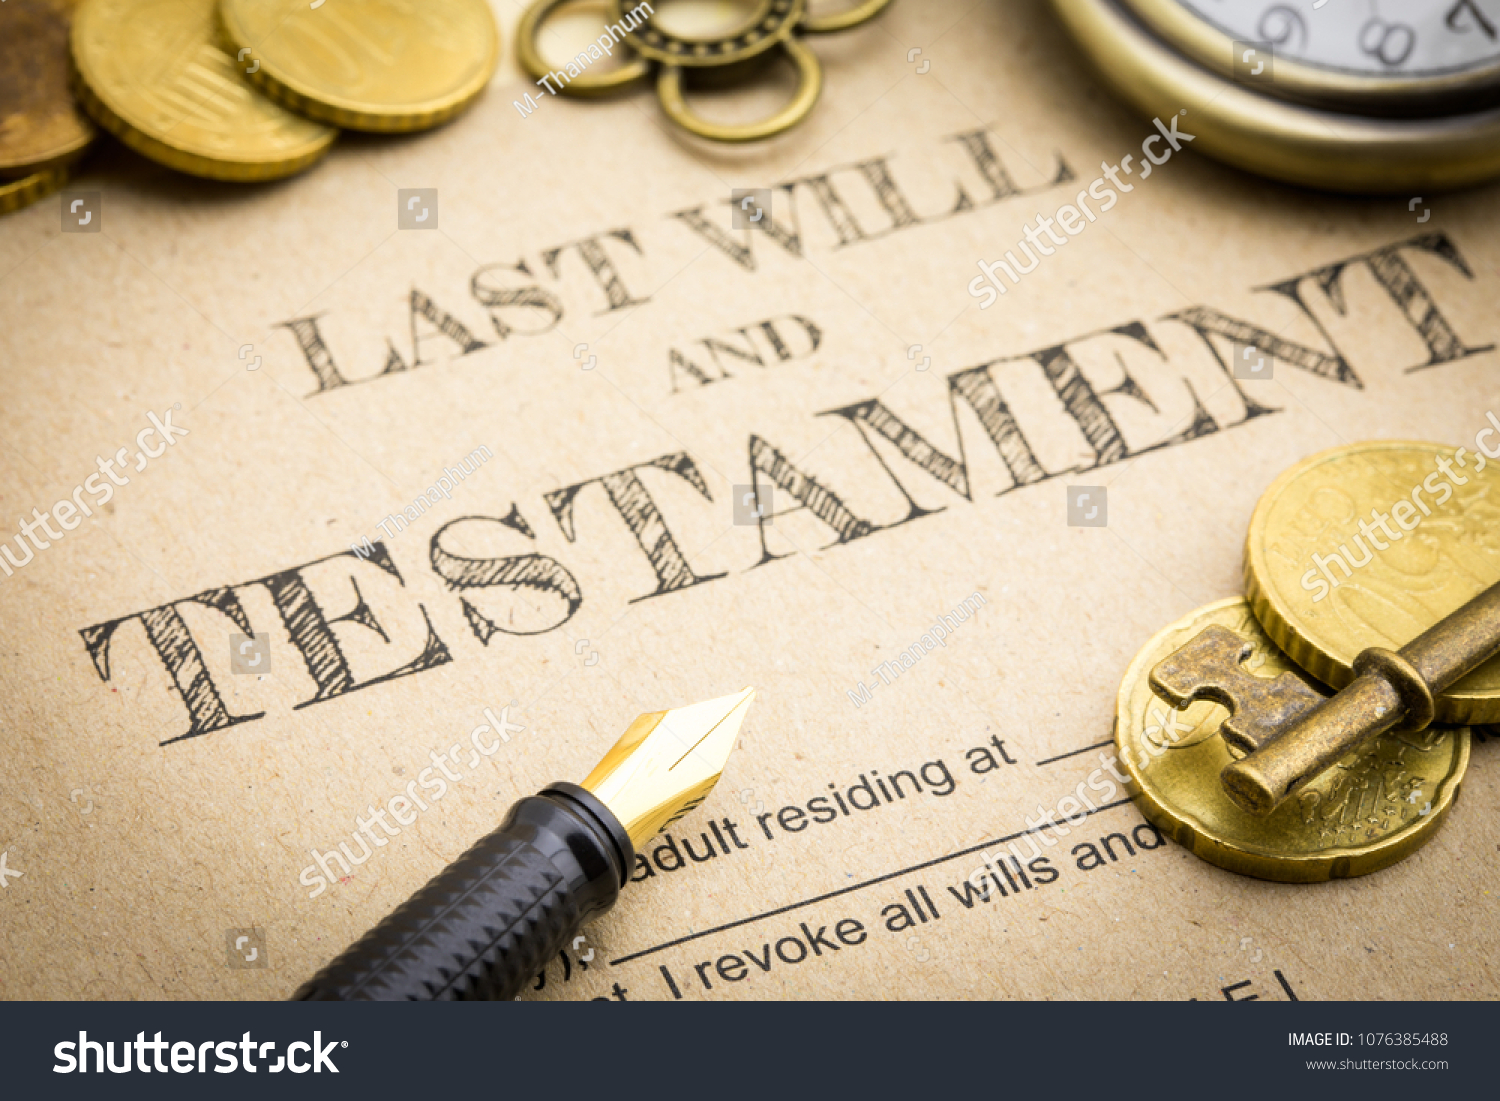 Close up Vintage of Black pen, Gold coins money, Vintage gold key and vintage clock on Last will and testament document concept #1076385488